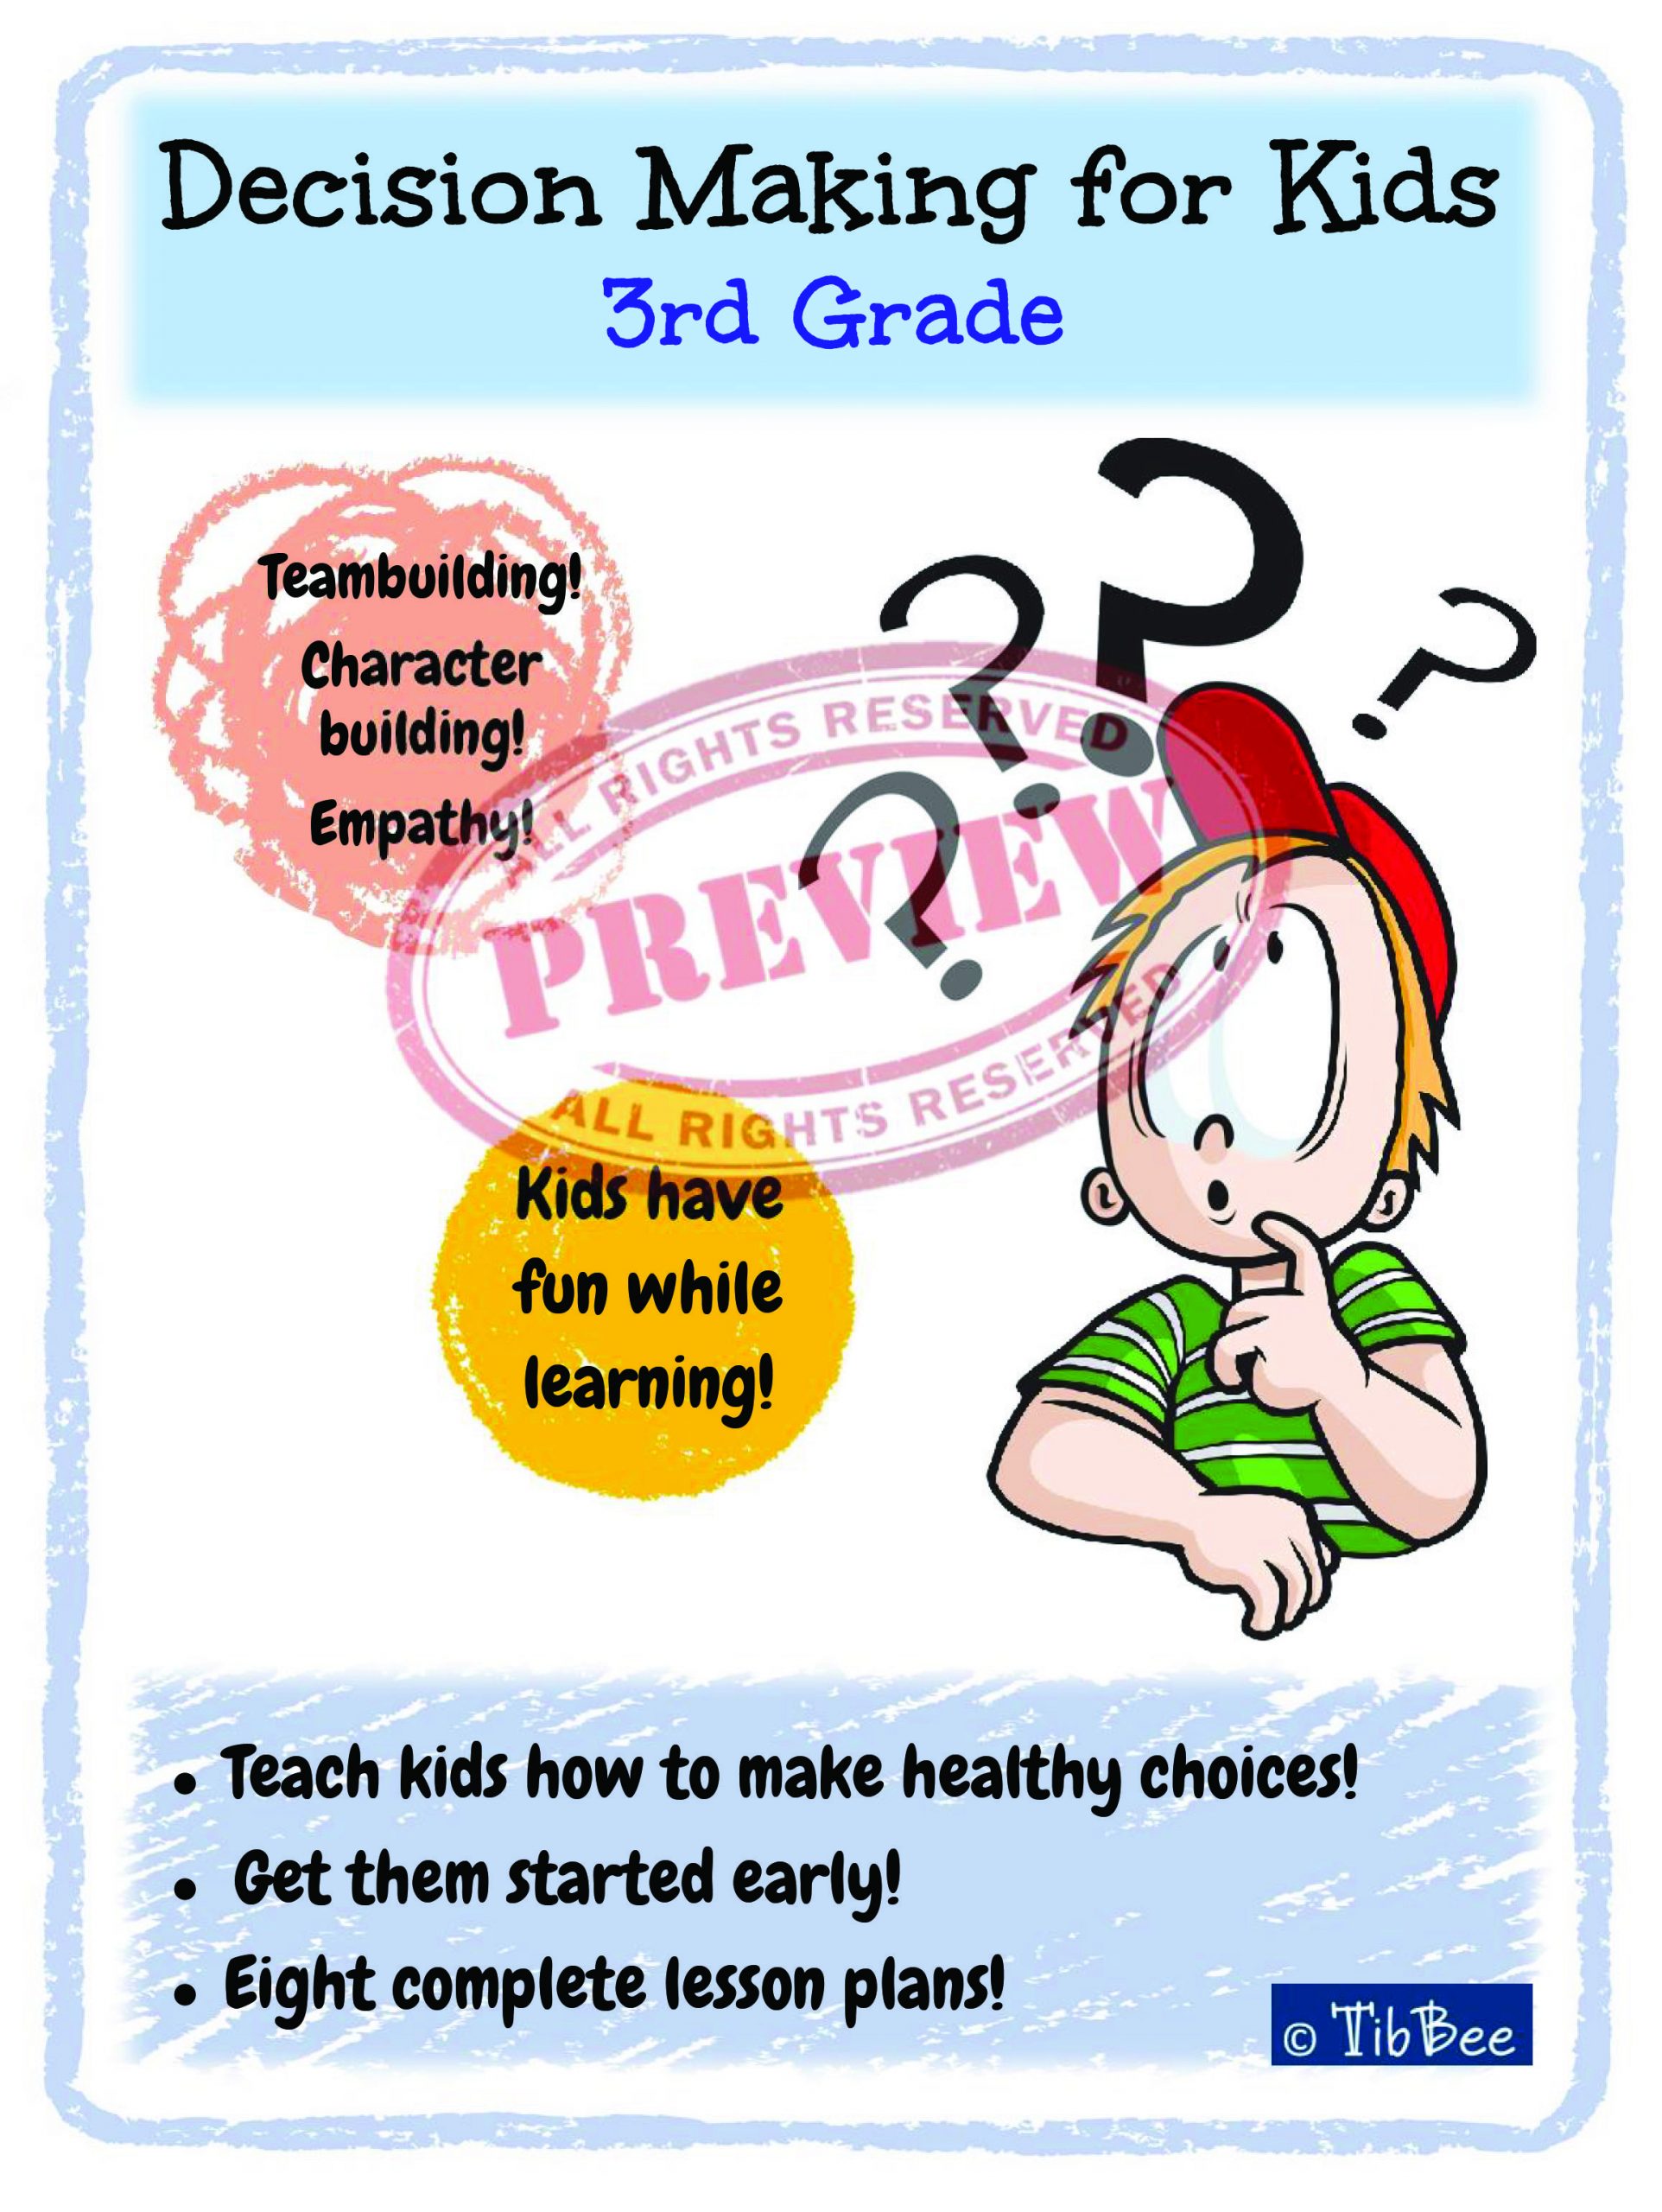 Our 3Rd Grade Lesson Plan Includes Eight Weeks Of Decision